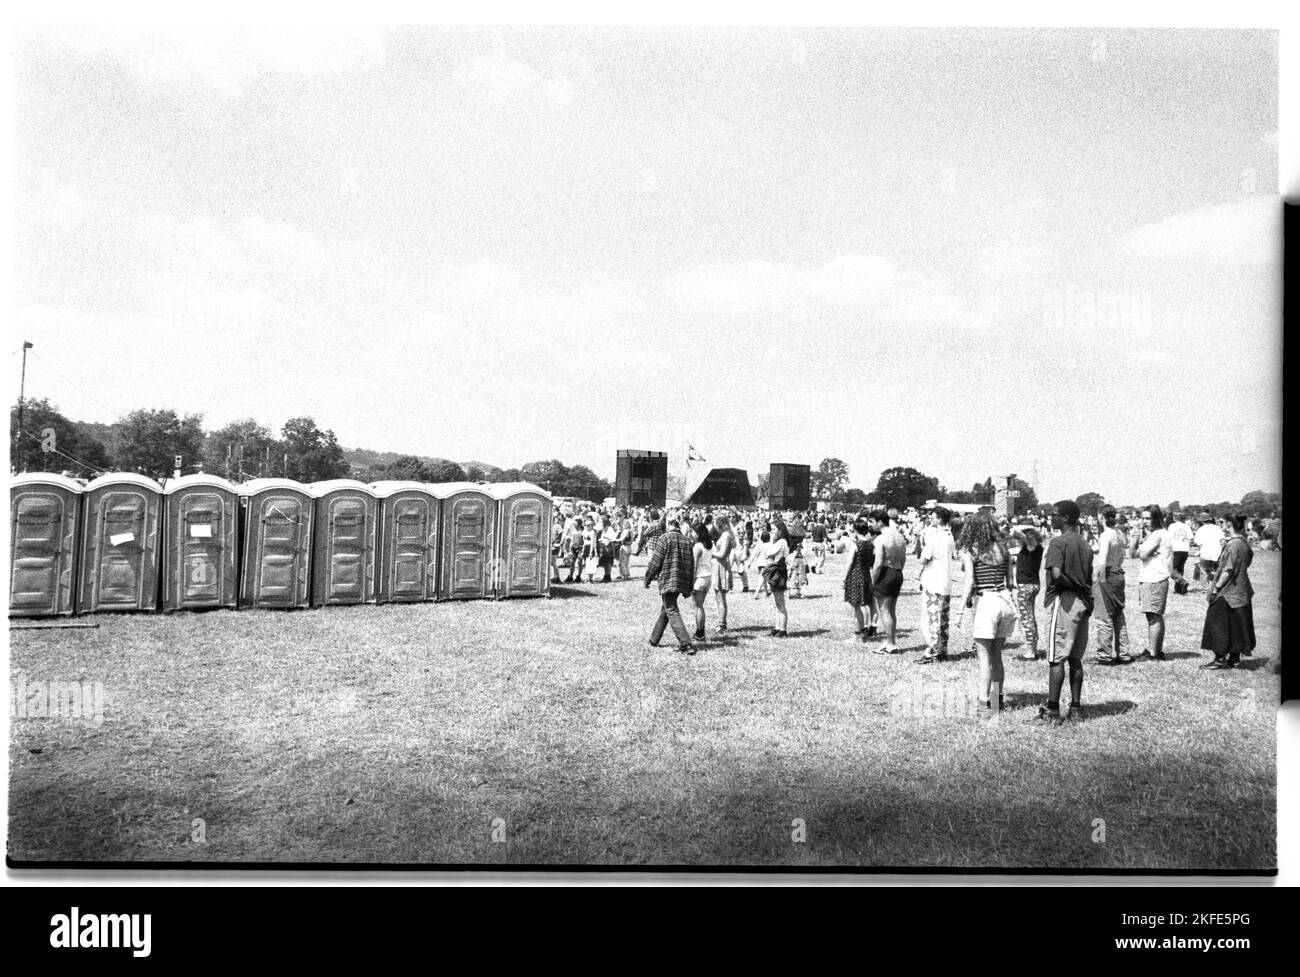 The portable toilets at the side of the Pyramid Stage at Glastonbury Festival, Pilton, England, June 26-28 1992. Photograph: ROB WATKINS Stock Photo